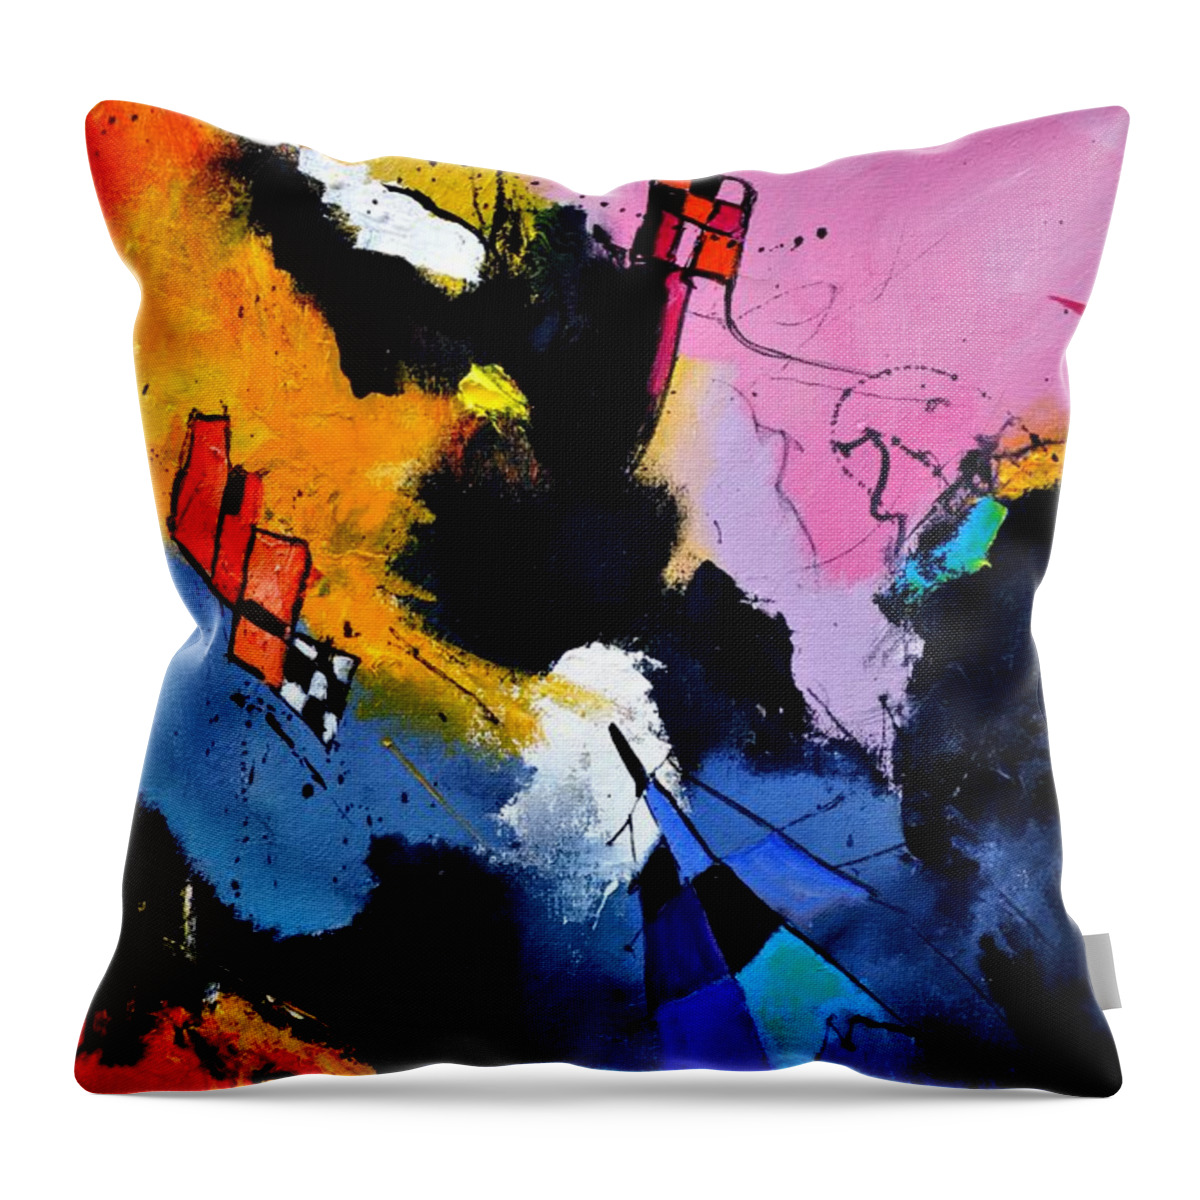 Abstract Throw Pillow featuring the painting Interstellar graffiti by Pol Ledent